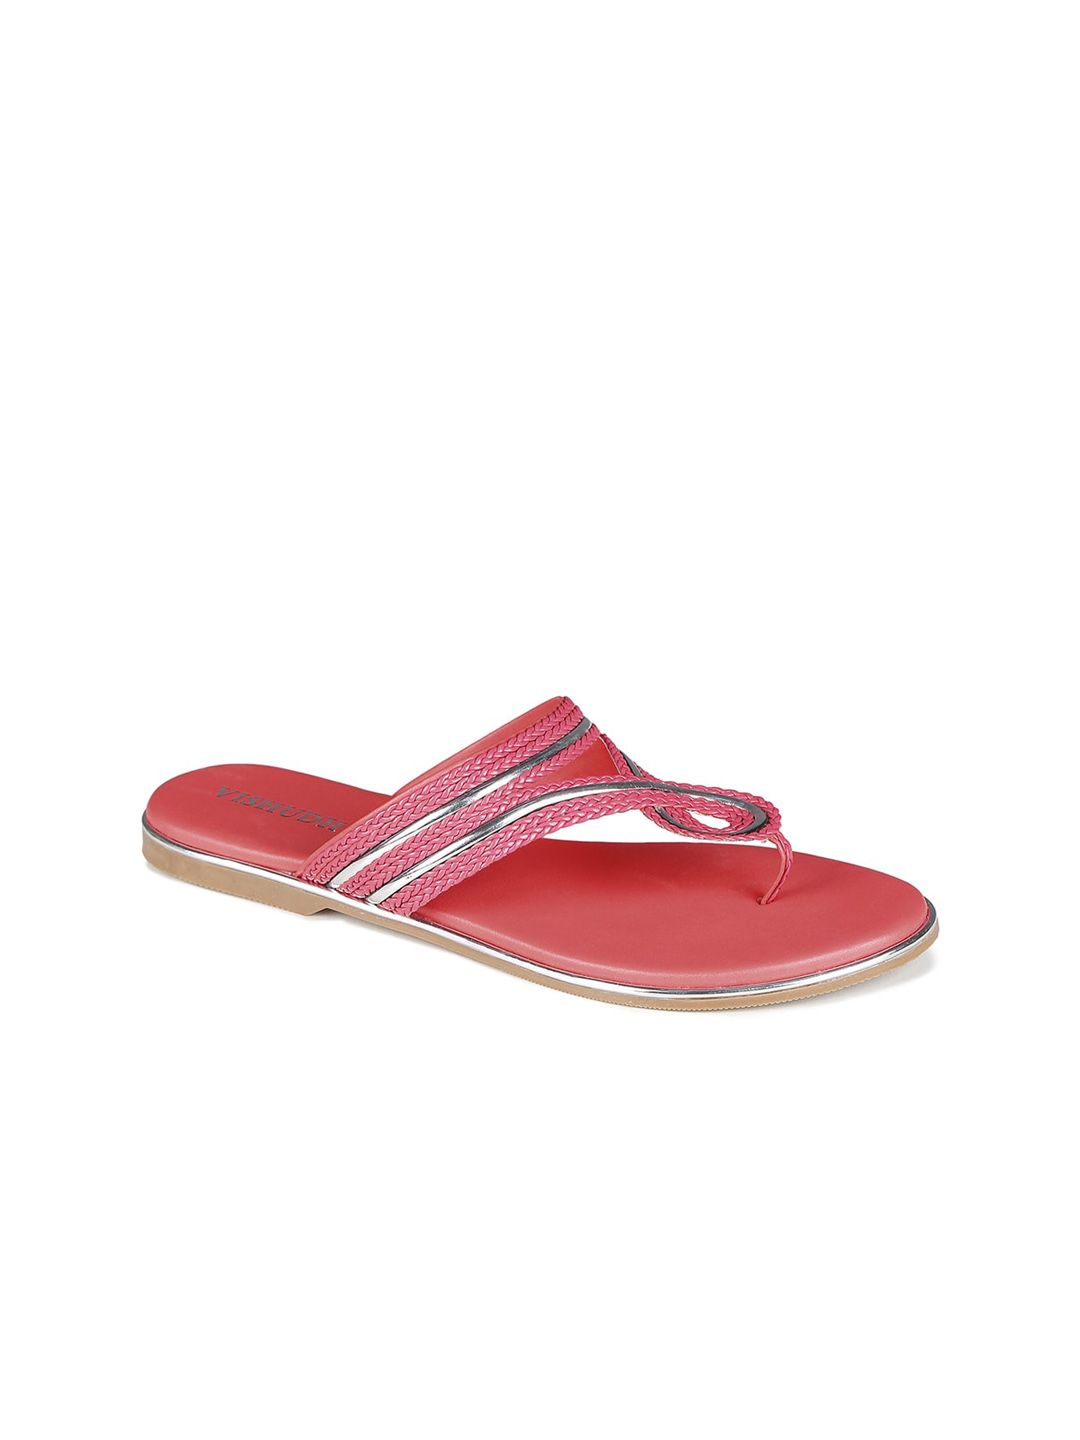 Vishudh Women Pink Striped Open Toe Flats Price in India